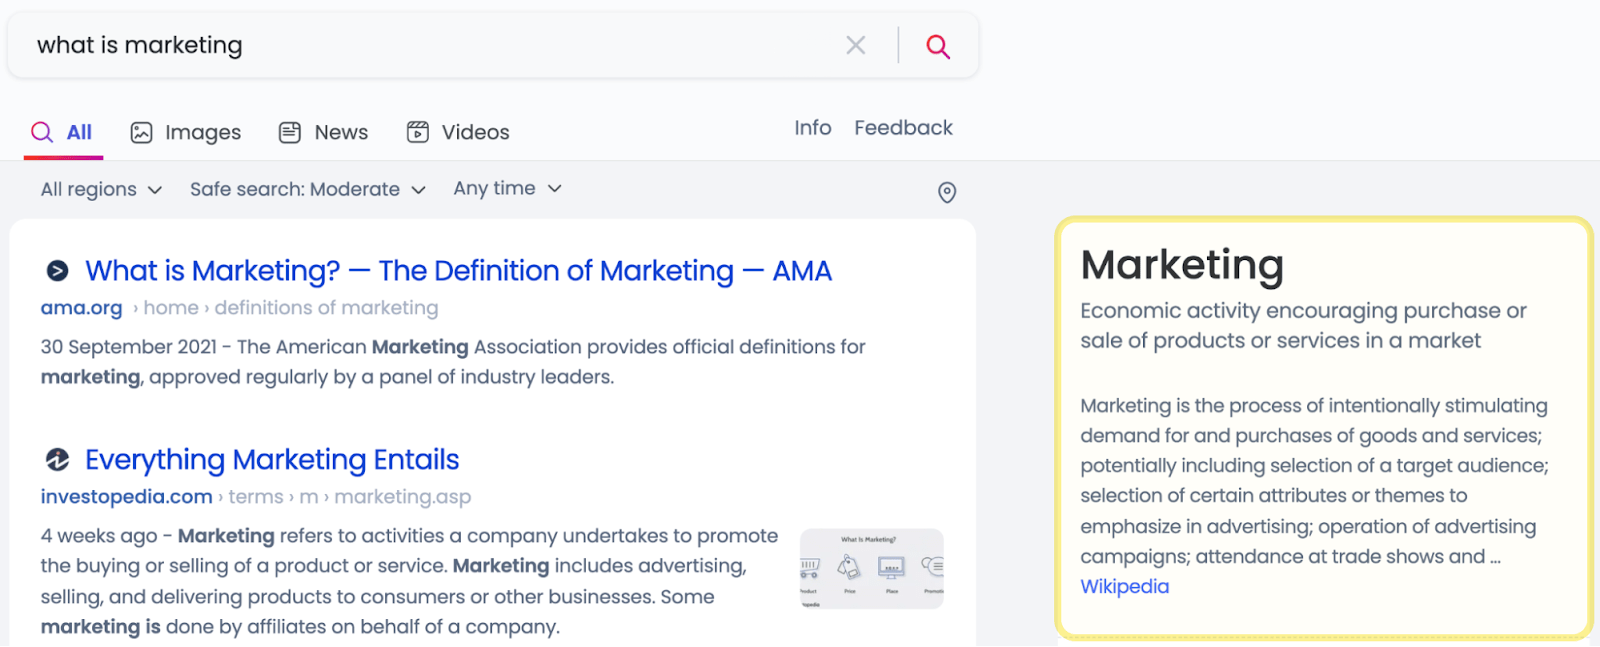 Search results for "marketing." Knowledge panel on the right